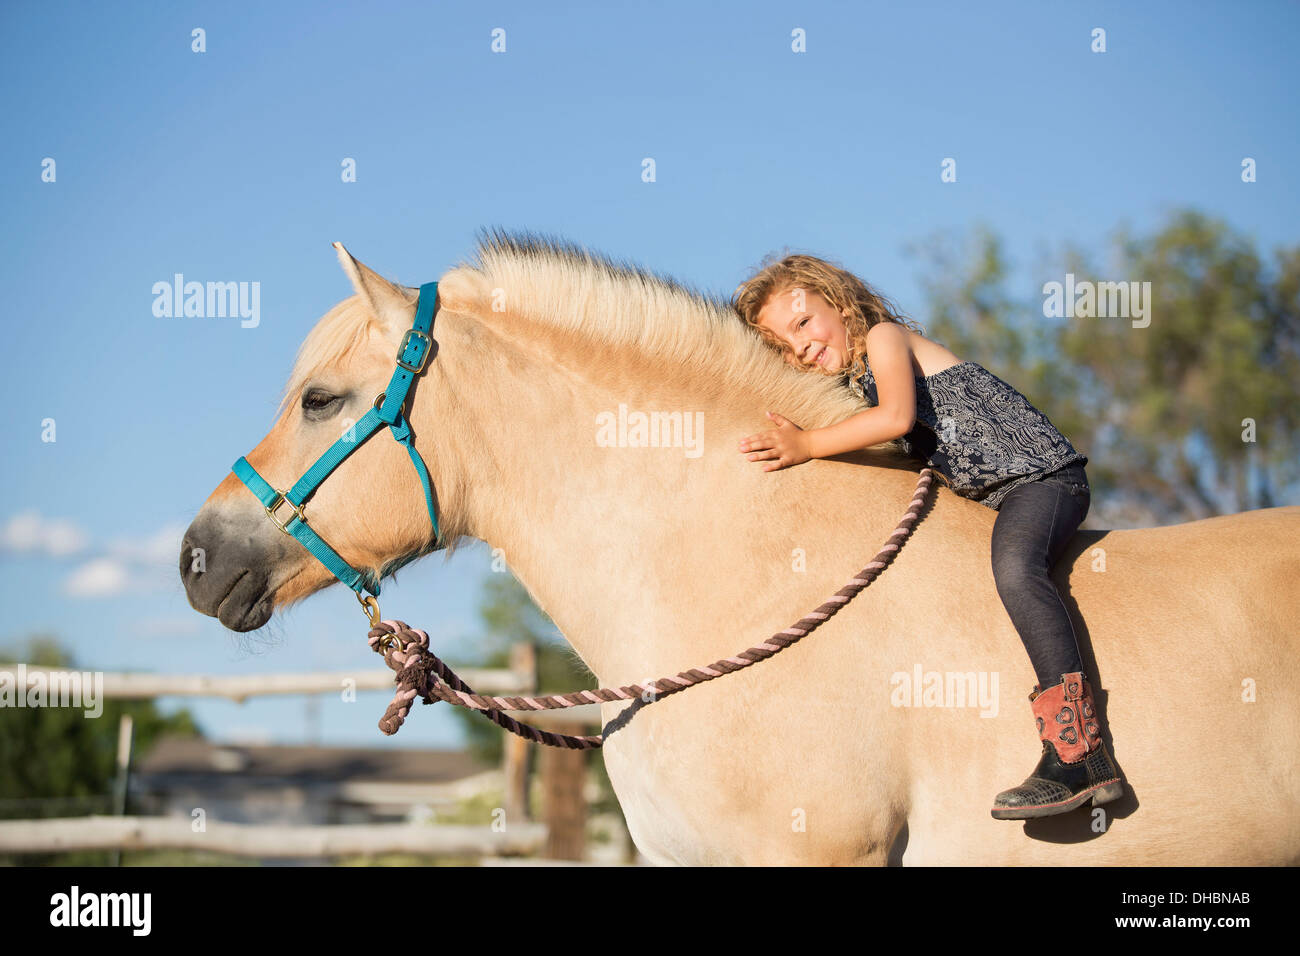 A young girl sitting on a horse. Stock Photo